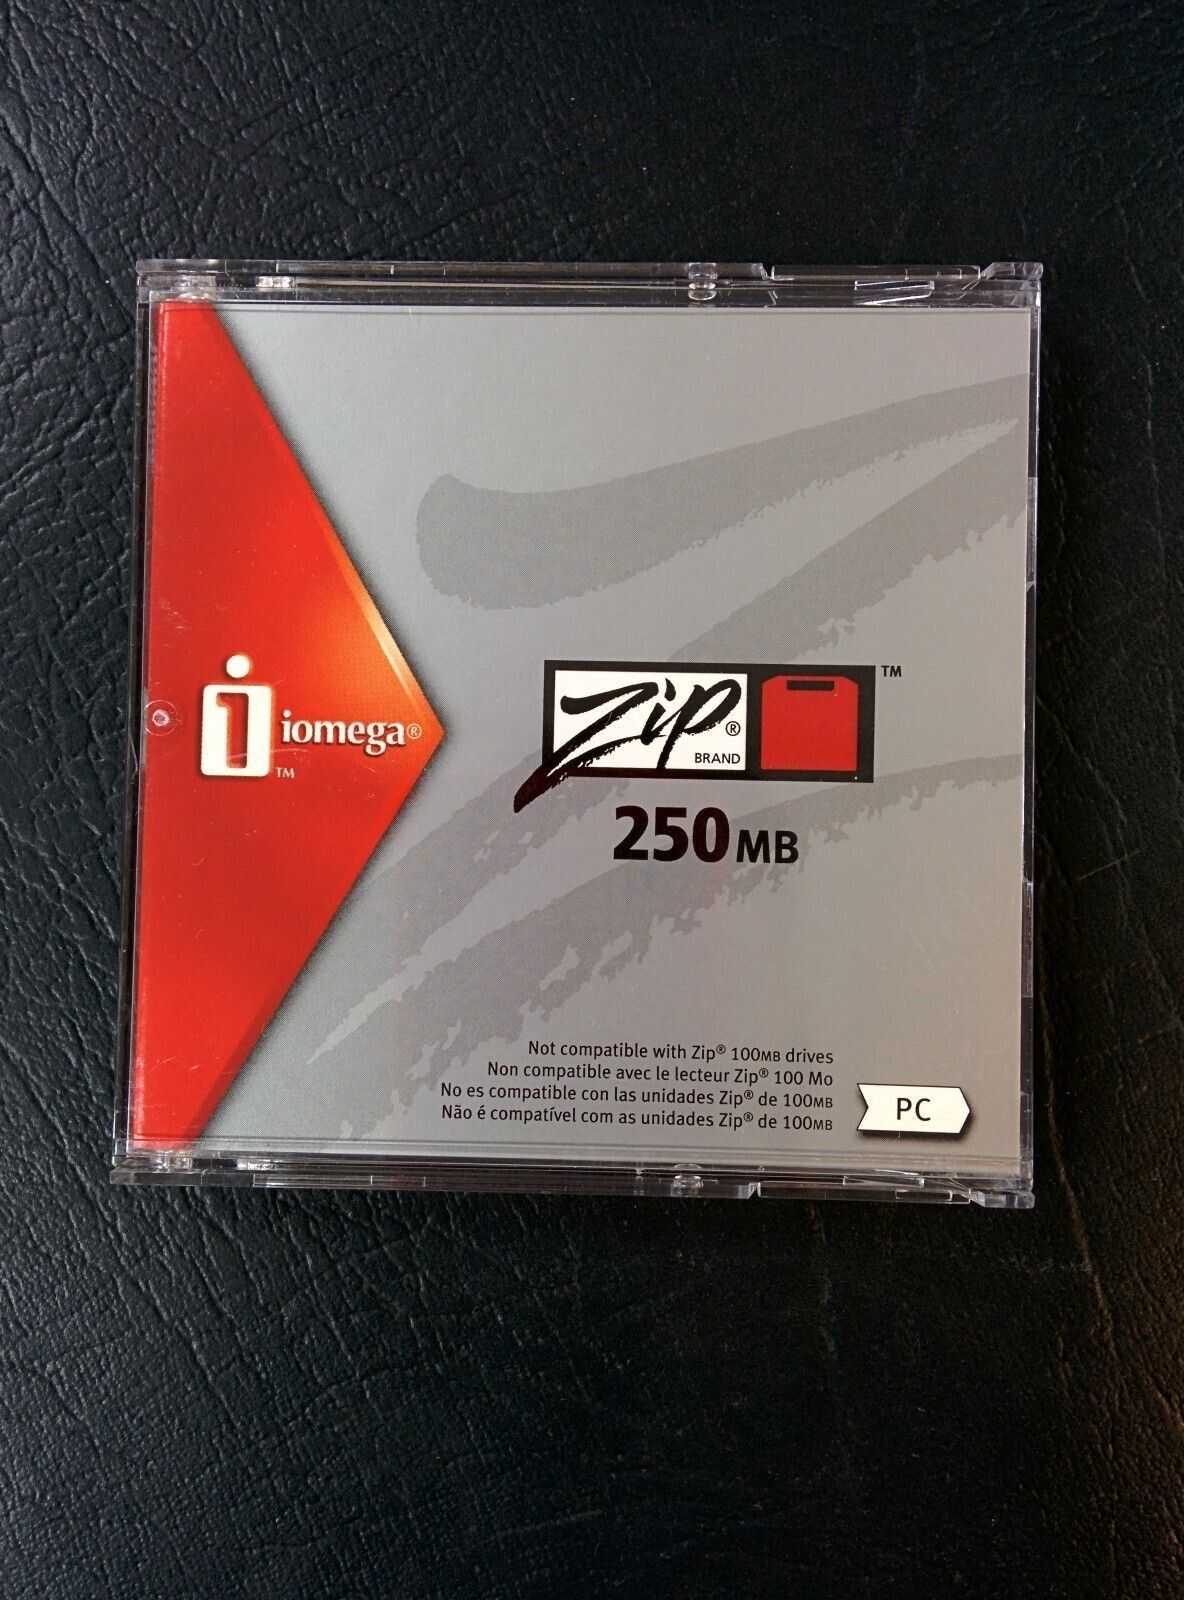 1 to 25 Brand New Iomega Zip Drive Disk Iomega Brand 250MB PC Formatted